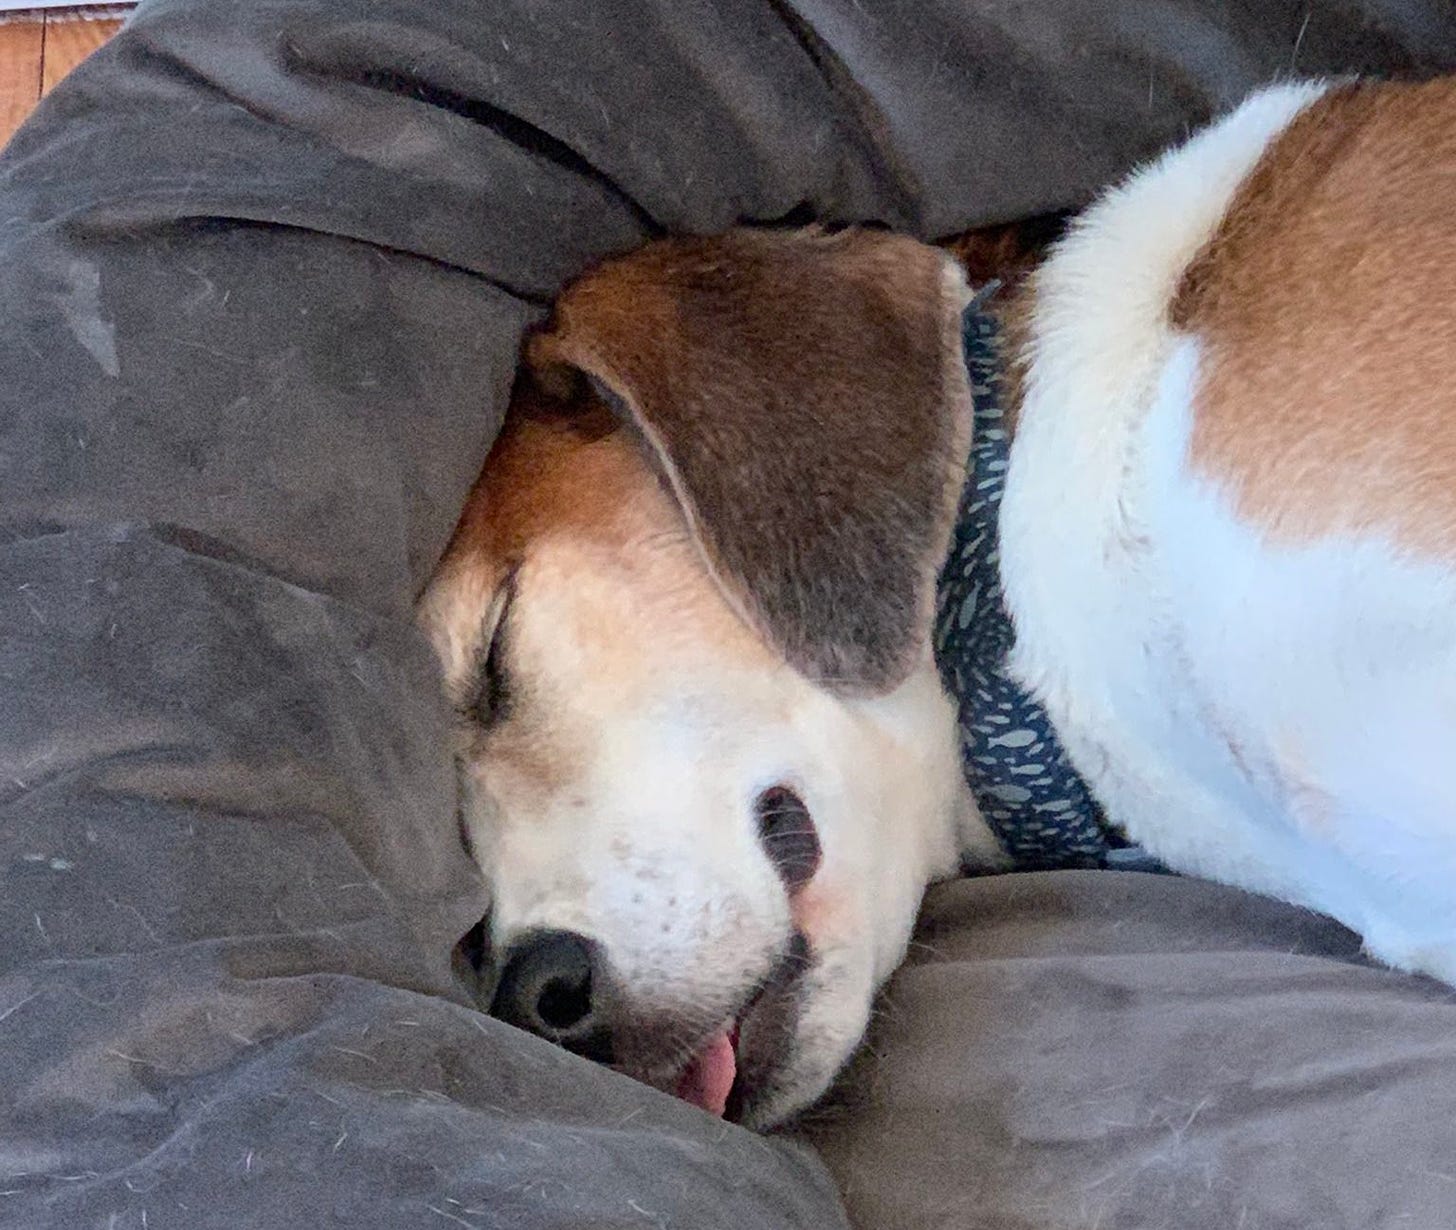 A white, brown and black American Foxhound is passed out on a dog bed with his tongue hanging out.